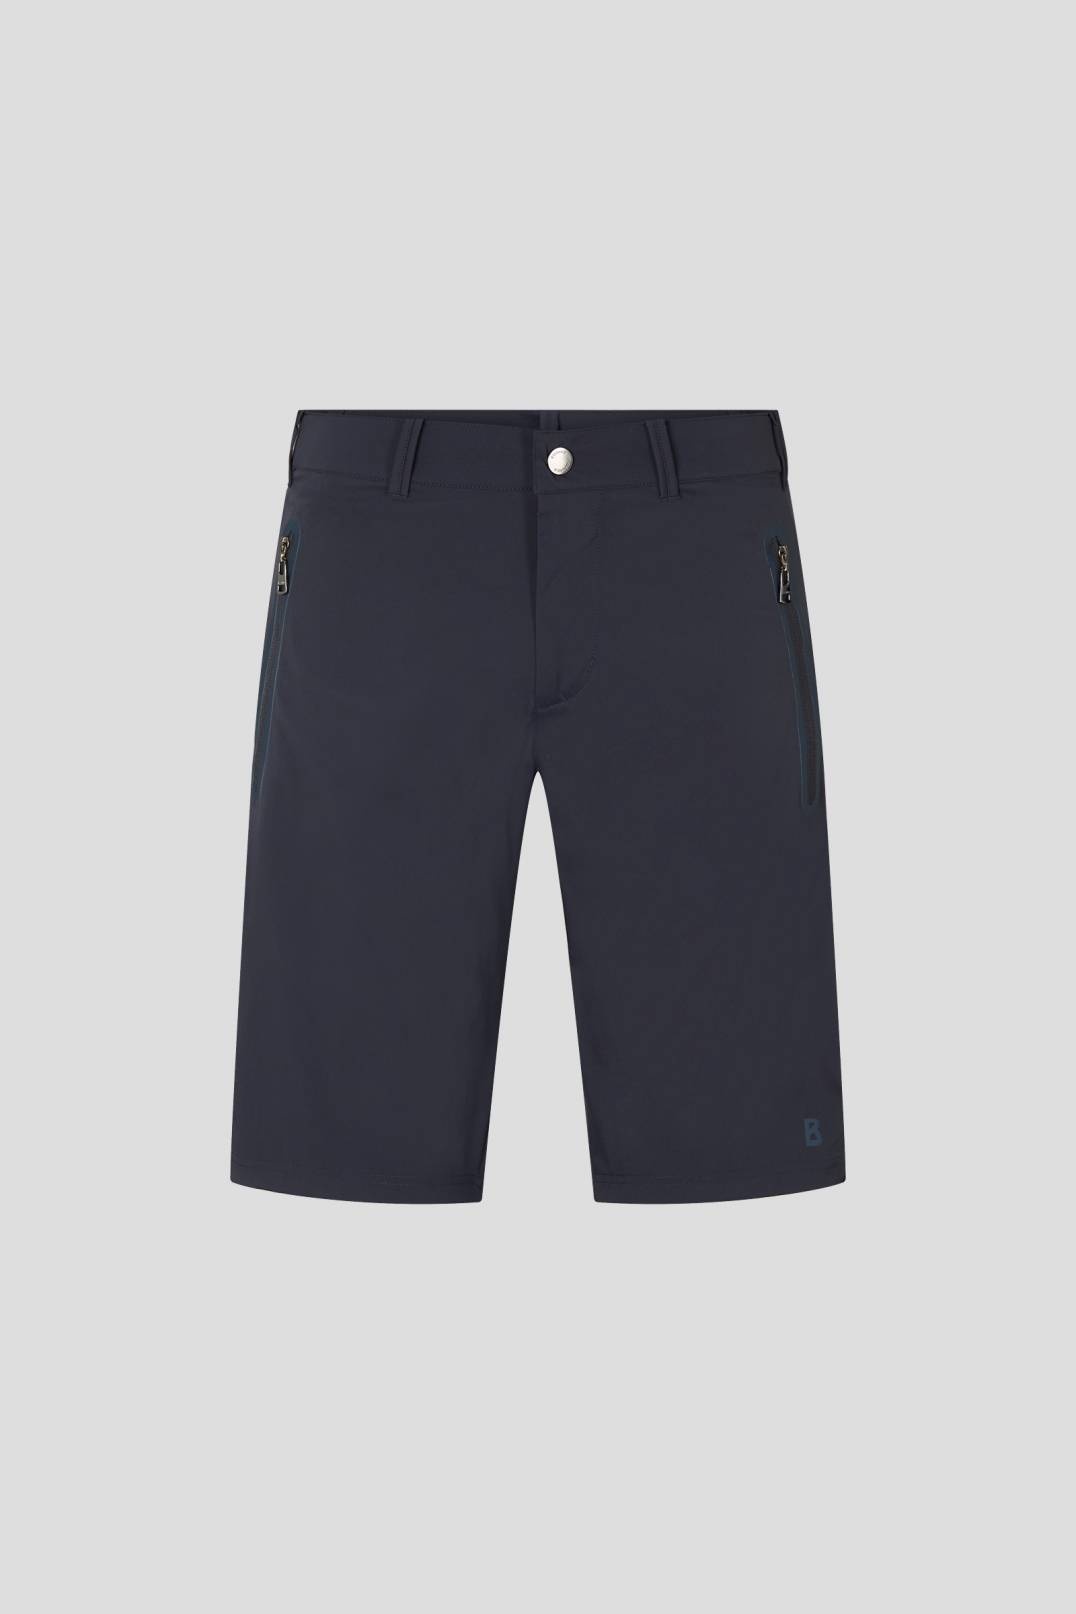 COLVIN FUNCTIONAL SHORTS IN NAVY BLUE - 1